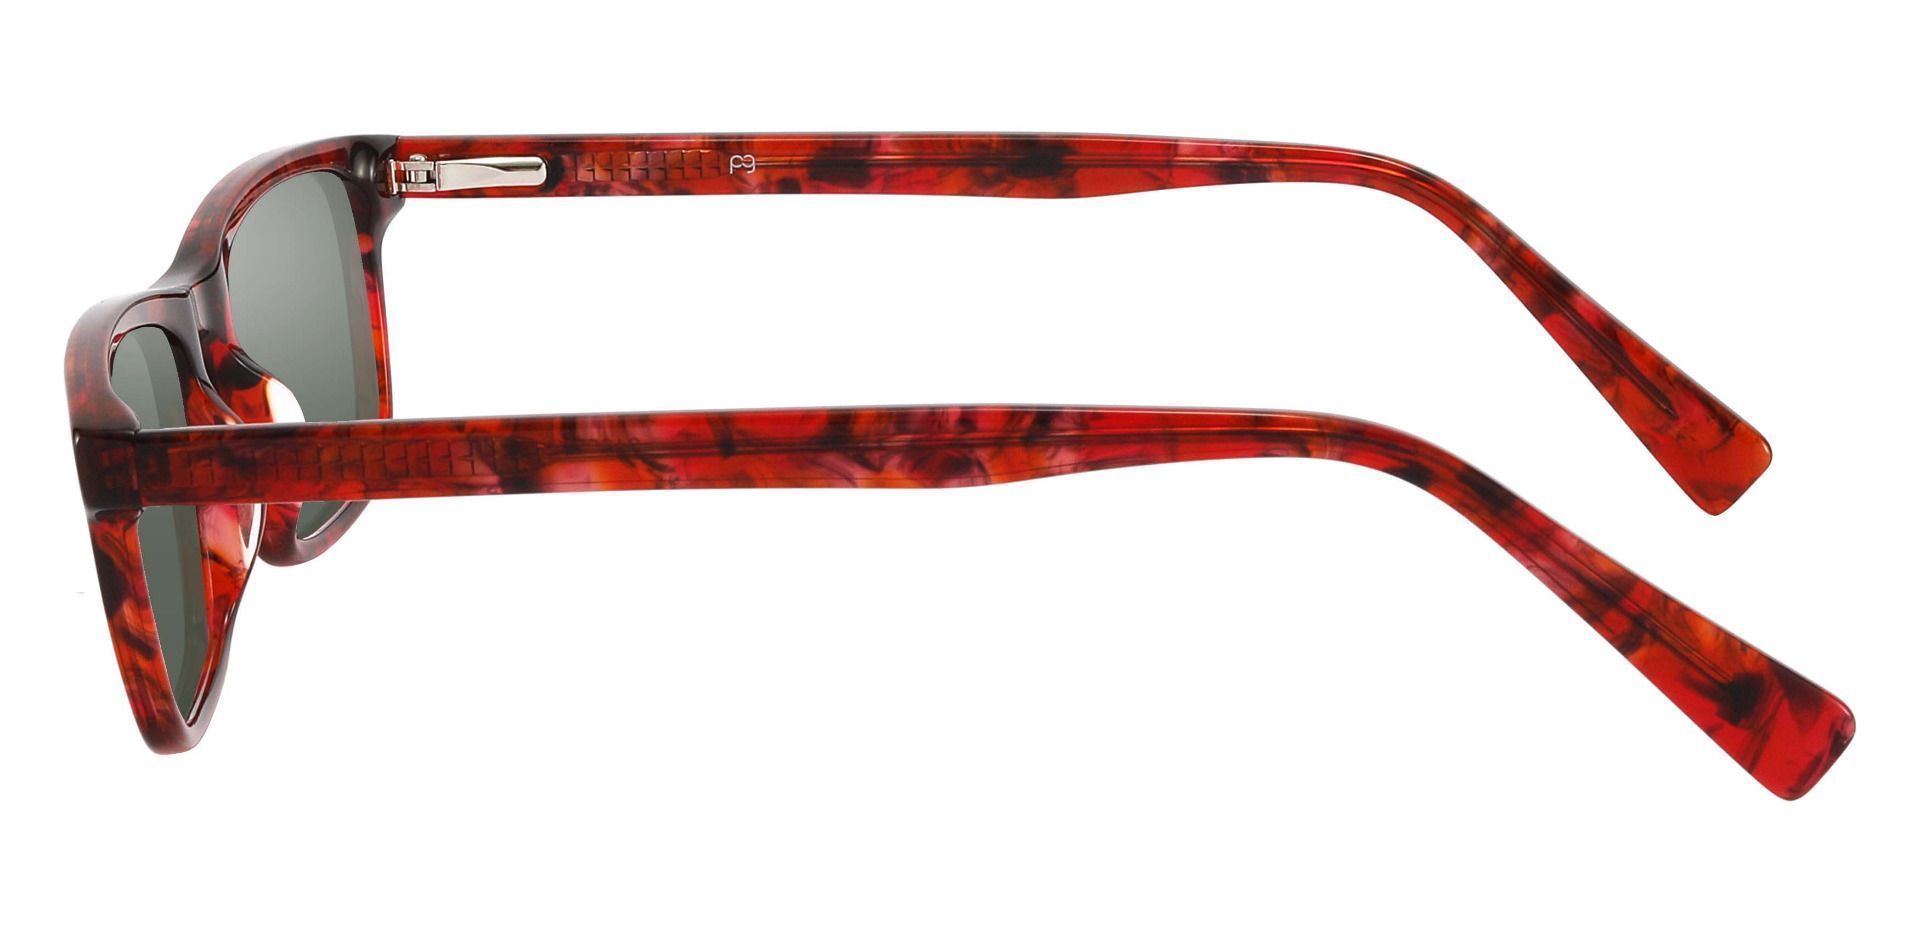 Munich Rectangle Reading Sunglasses - Red Frame With Green Lenses